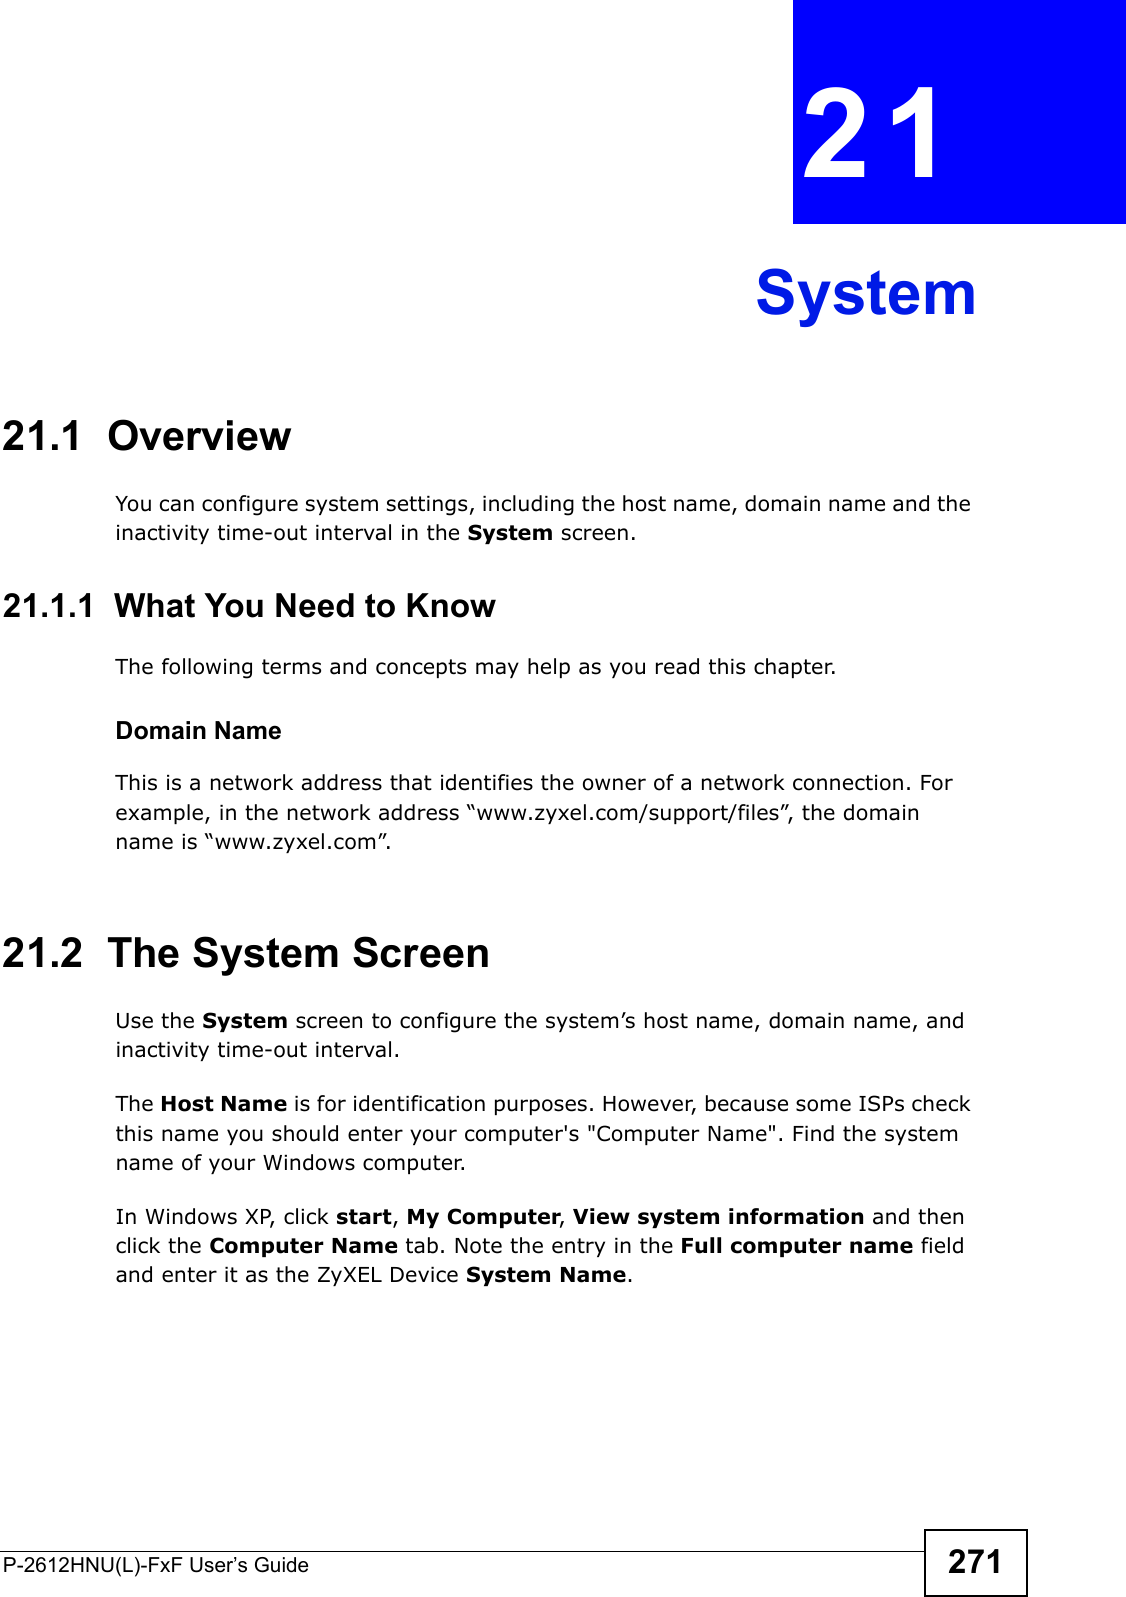 P-2612HNU(L)-FxF User’s Guide 271CHAPTER   21 System21.1  Overview You can configure system settings, including the host name, domain name and theinactivity time-out interval in the System screen.   21.1.1  What You Need to KnowThe following terms and concepts may help as you read this chapter.Domain NameThis is a network address that identifies the owner of a network connection. For example, in the network address “www.zyxel.com/support/files”, the domain name is “www.zyxel.com”.21.2  The System ScreenUse the System screen to configure the system’s host name, domain name, and inactivity time-out interval.The Host Name is for identification purposes. However, because some ISPs check this name you should enter your computer&apos;s &quot;Computer Name&quot;. Find the system name of your Windows computer. In Windows XP, click start, My Computer,View system information and then click the Computer Name tab. Note the entry in the Full computer name fieldand enter it as the ZyXEL Device System Name.